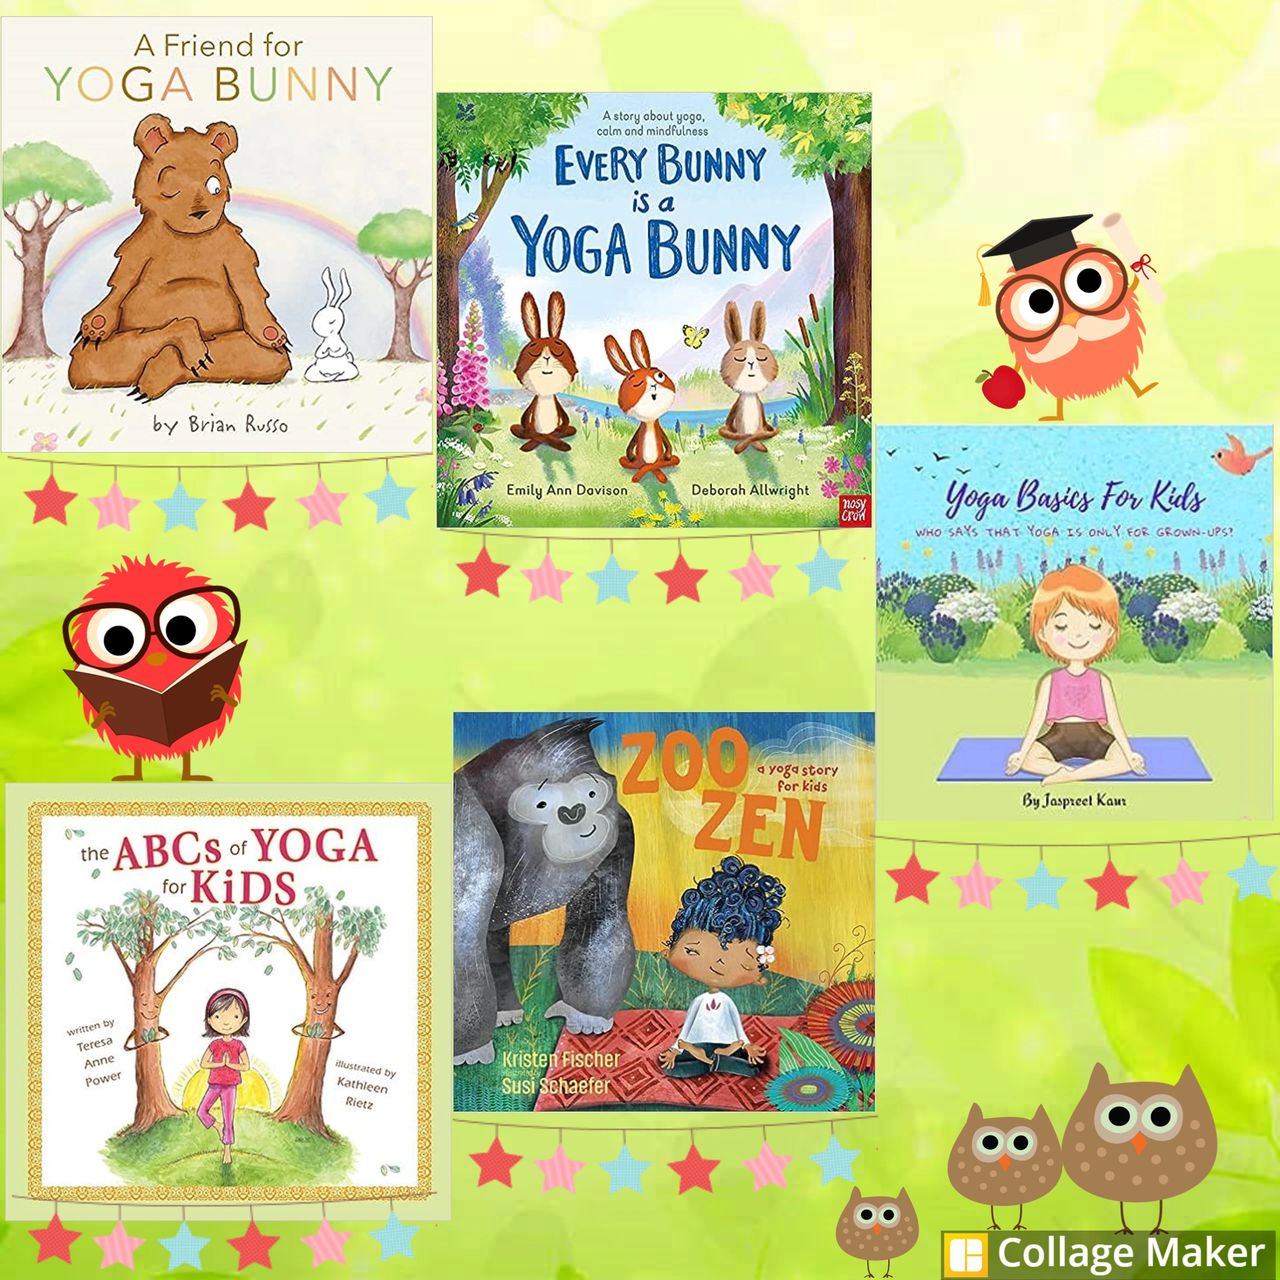 A Friend for Yoga Bunny: An Easter And Springtime Book For Kids